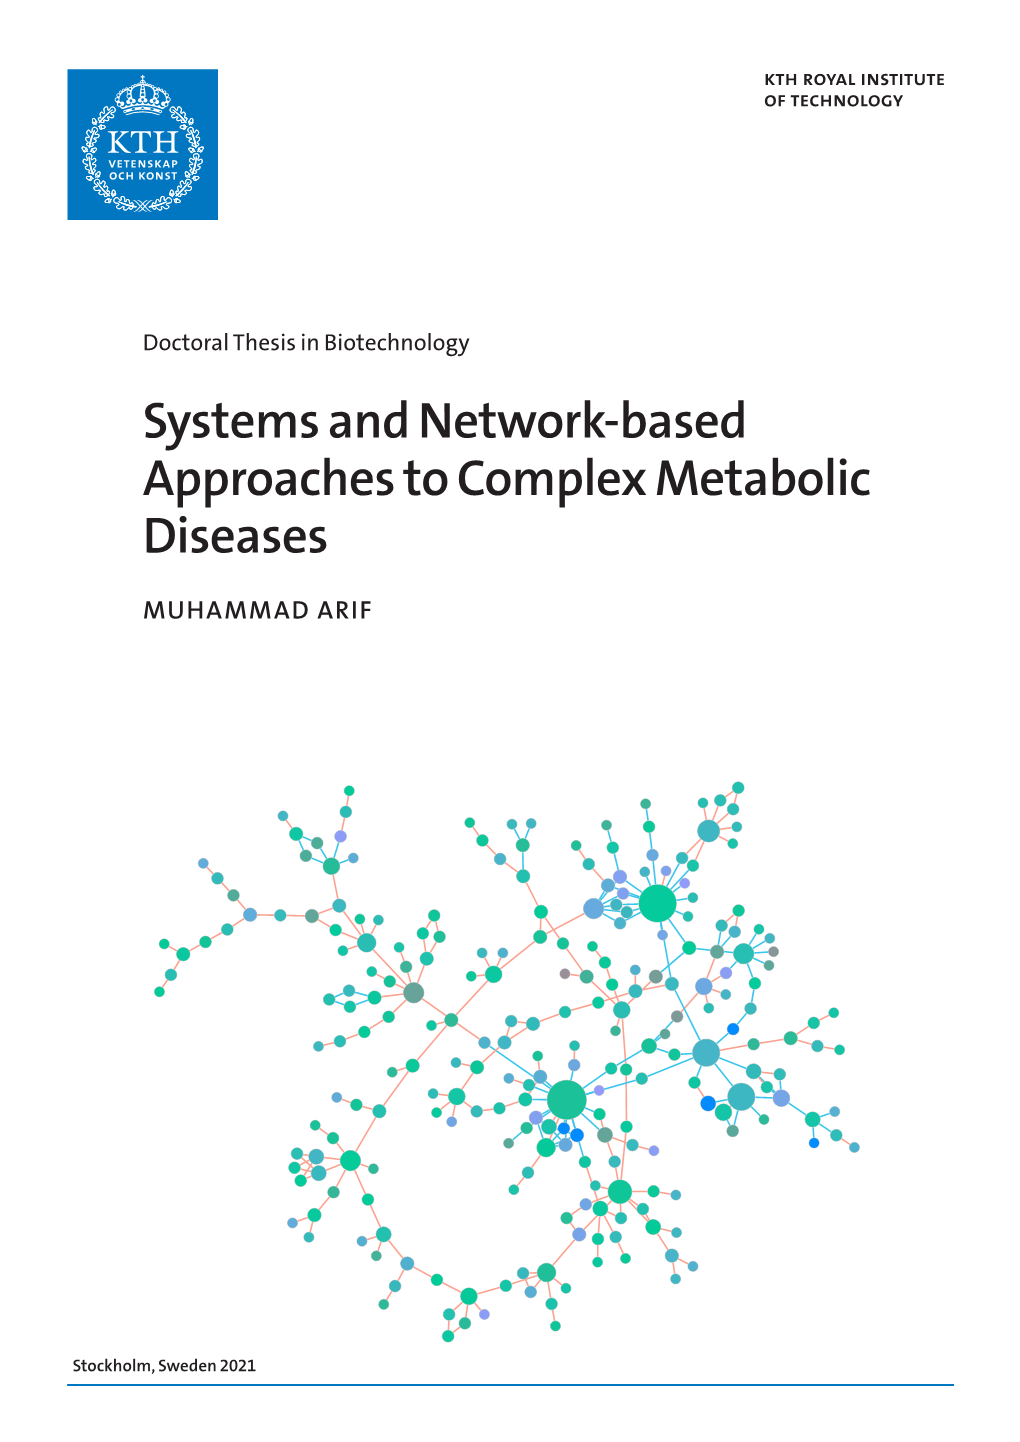 Systems and Network-Based Approaches to Complex Metabolic Diseases